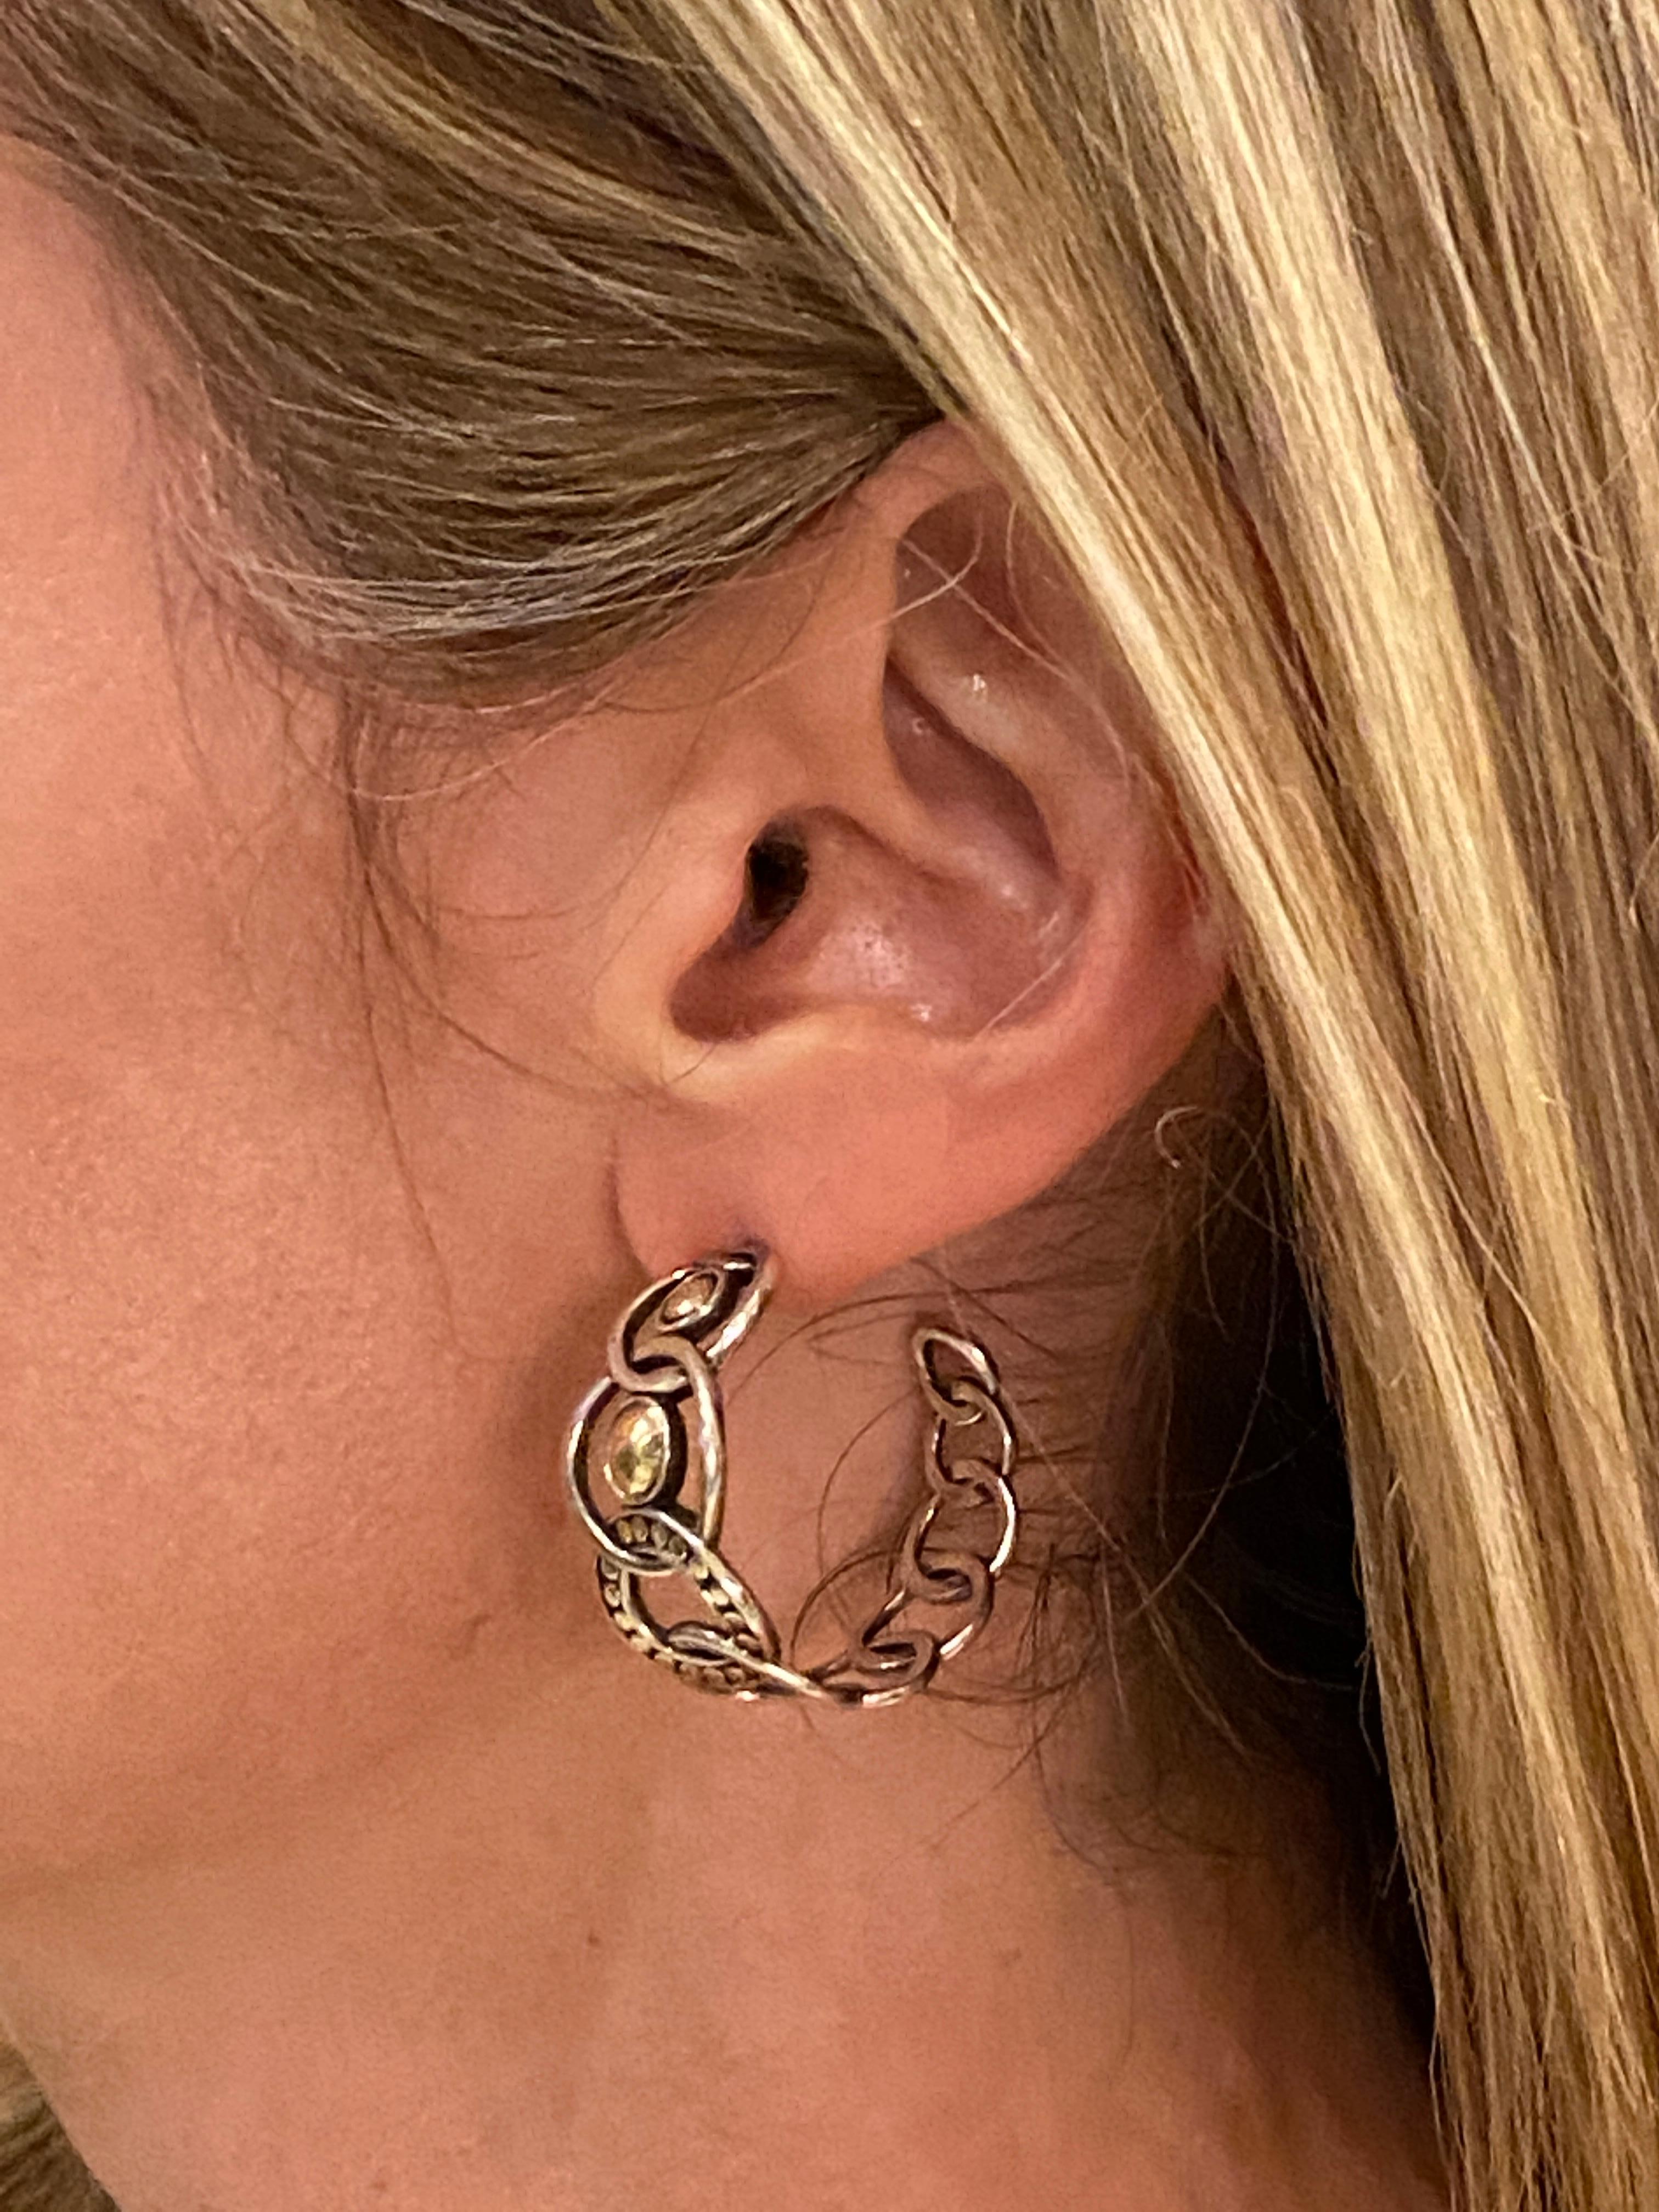 Stylish hoop earrings by designer John Hardy fashioned in sterling silver and 22 karat yellow gold. The hoops are part of the Dot Collection, measure 1.0 inch in diameter, and are signed JH 925 22K. 